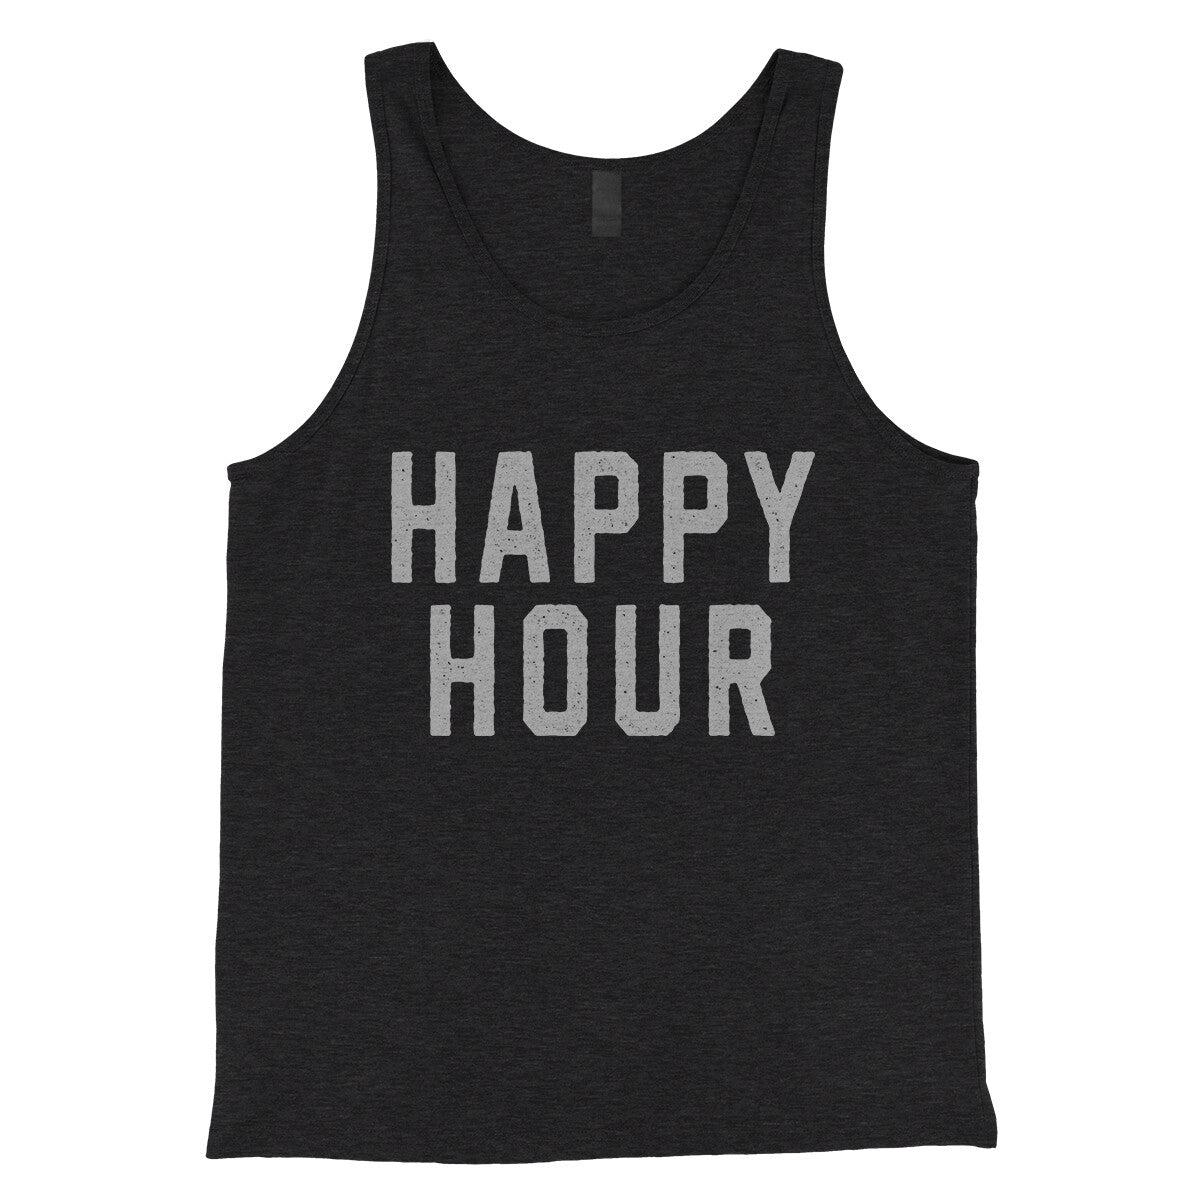 Happy Hour in Charcoal Black TriBlend Color